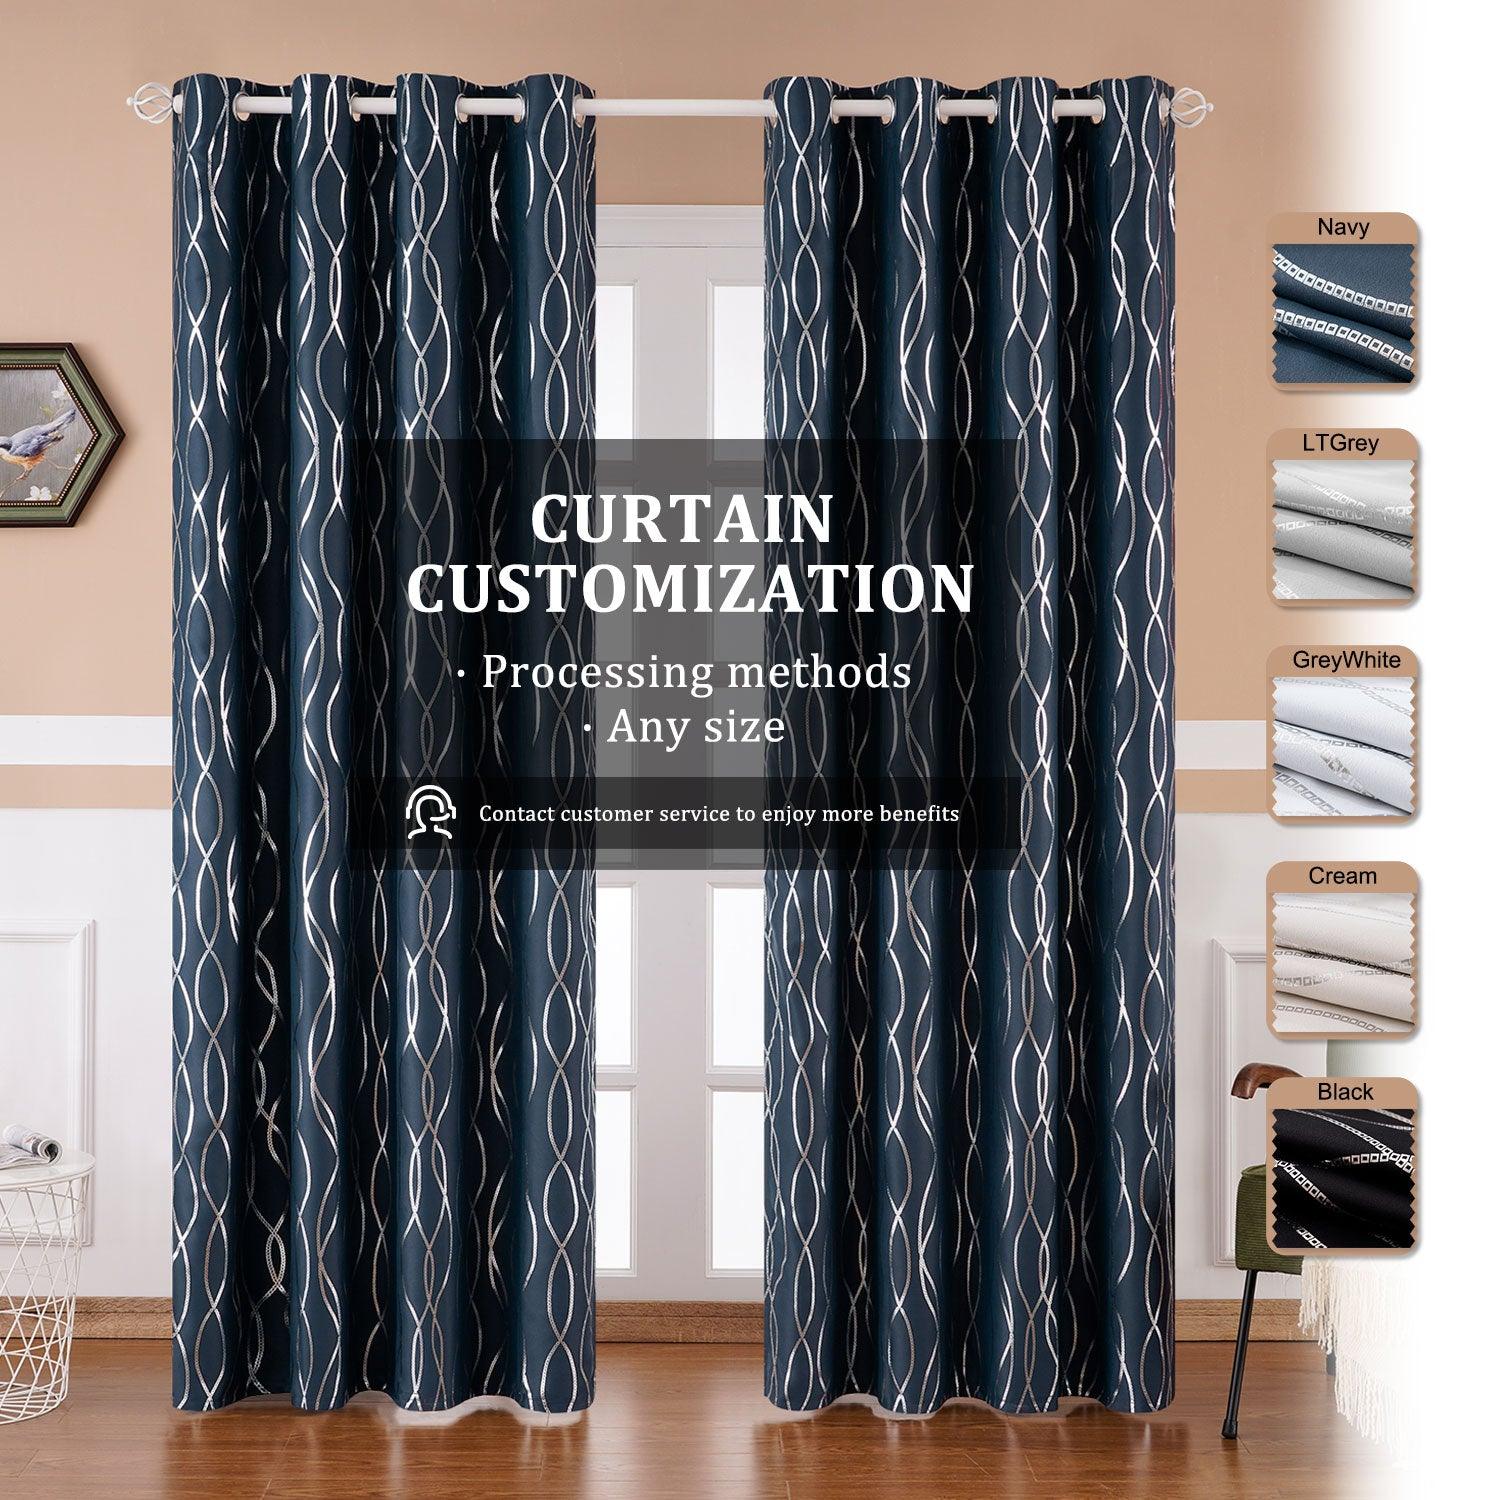 Custom-Made Blackout Curtains -Pongee Printed Thermal Insulating Drapes For House Bedroom,100% Blackout,1 Panel - Topfinel